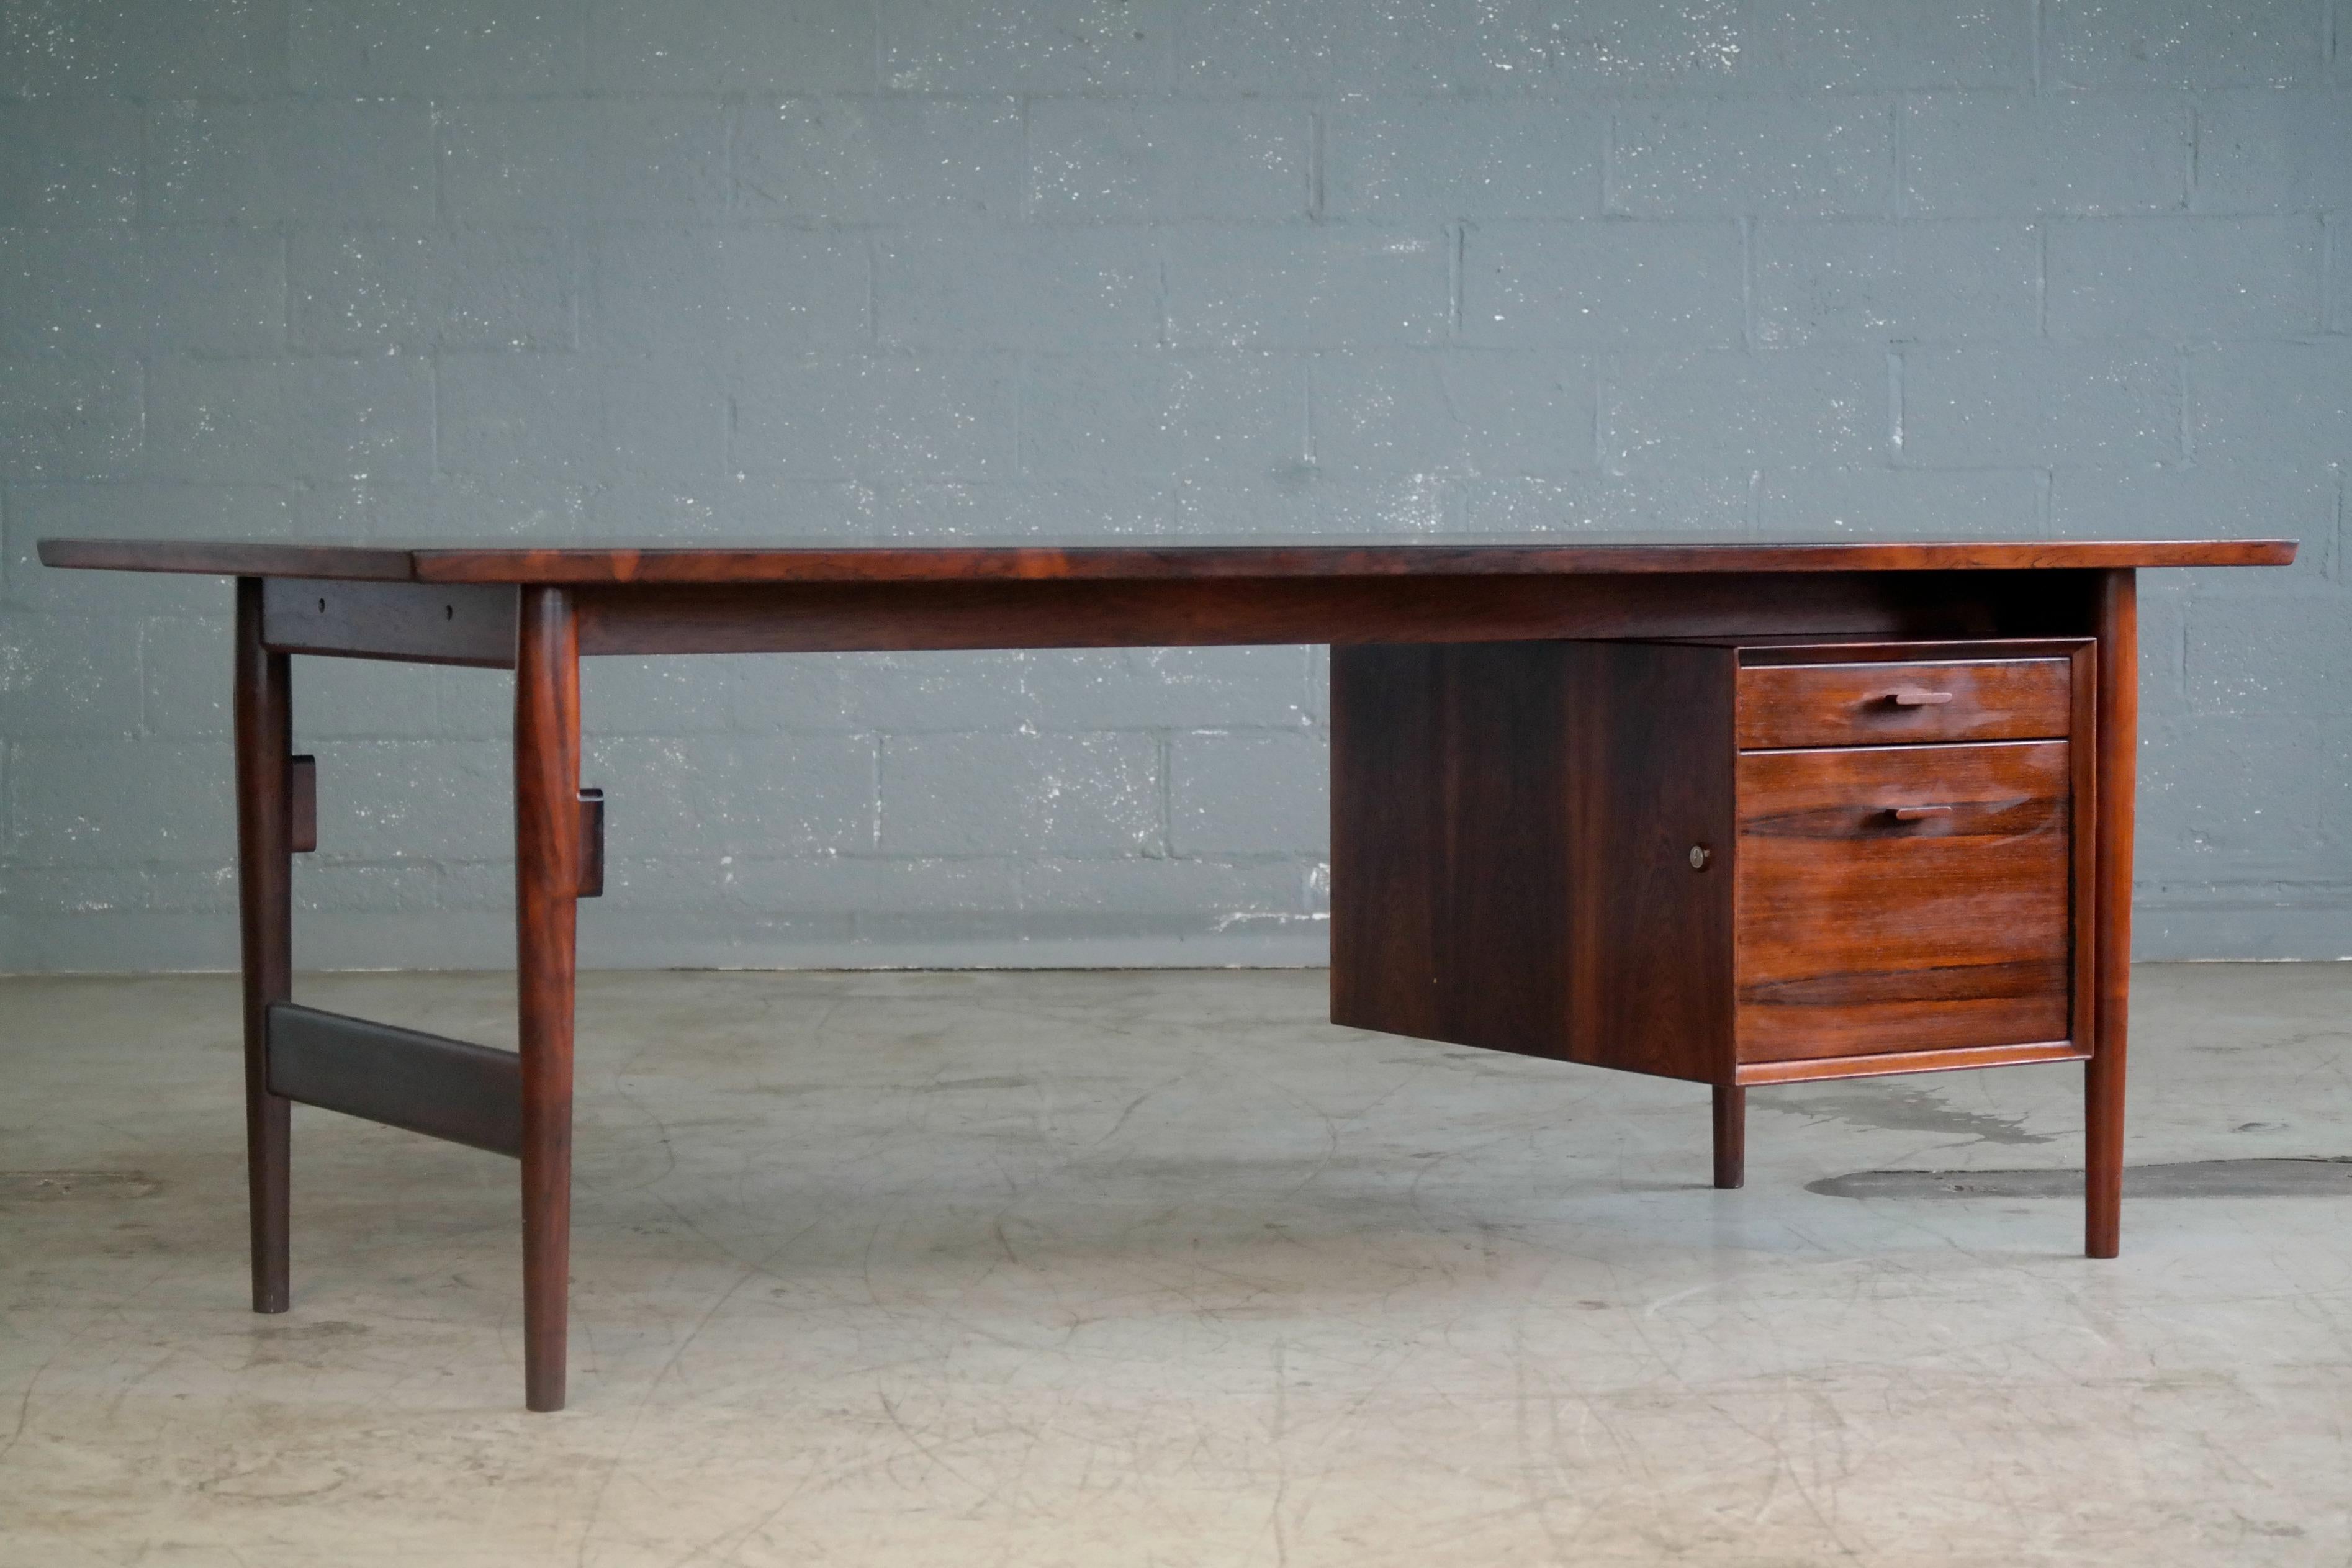 Magnificent large Danish midcentury executive desk in rosewood designed by Arne Vodder in the 1950s and manufactured by Sibast of Denmark. Thick solid edges throughout and nice color and grain. Some minor fading and very minor scratches and dings to